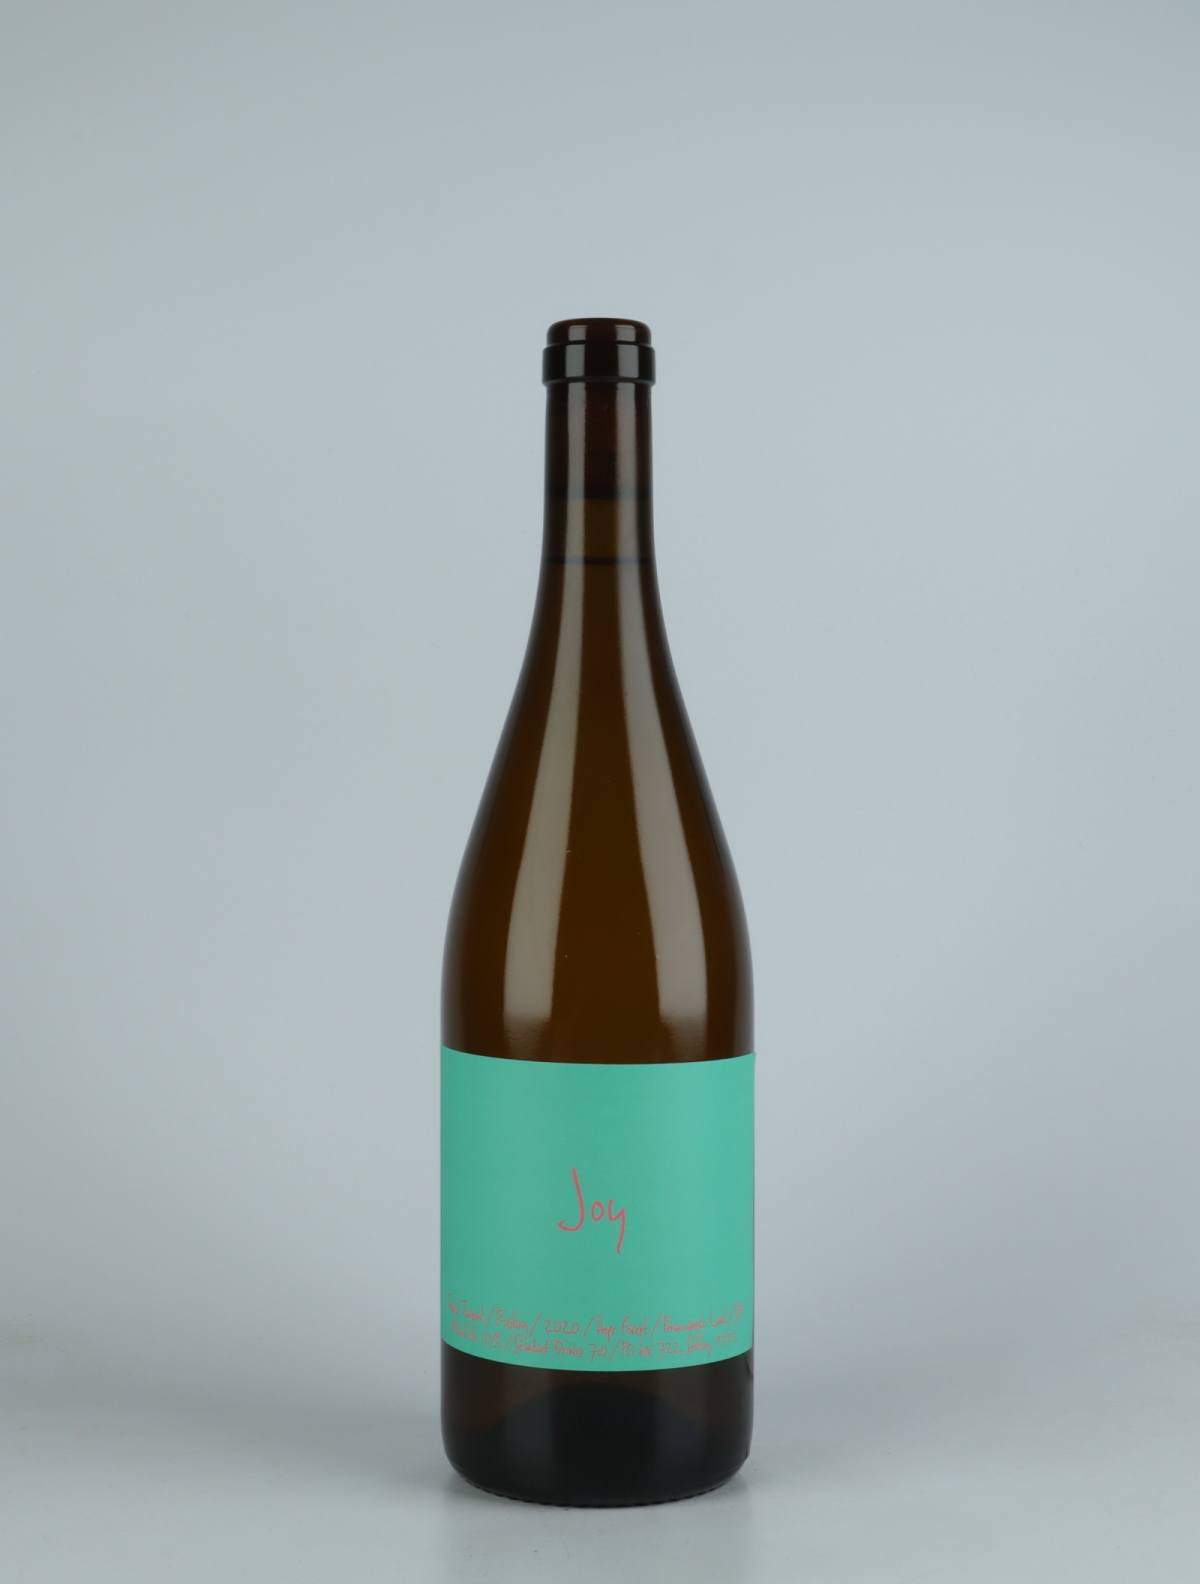 A bottle 2020 Joy Riesling White wine from Travis Tausend, Adelaide Hills in 